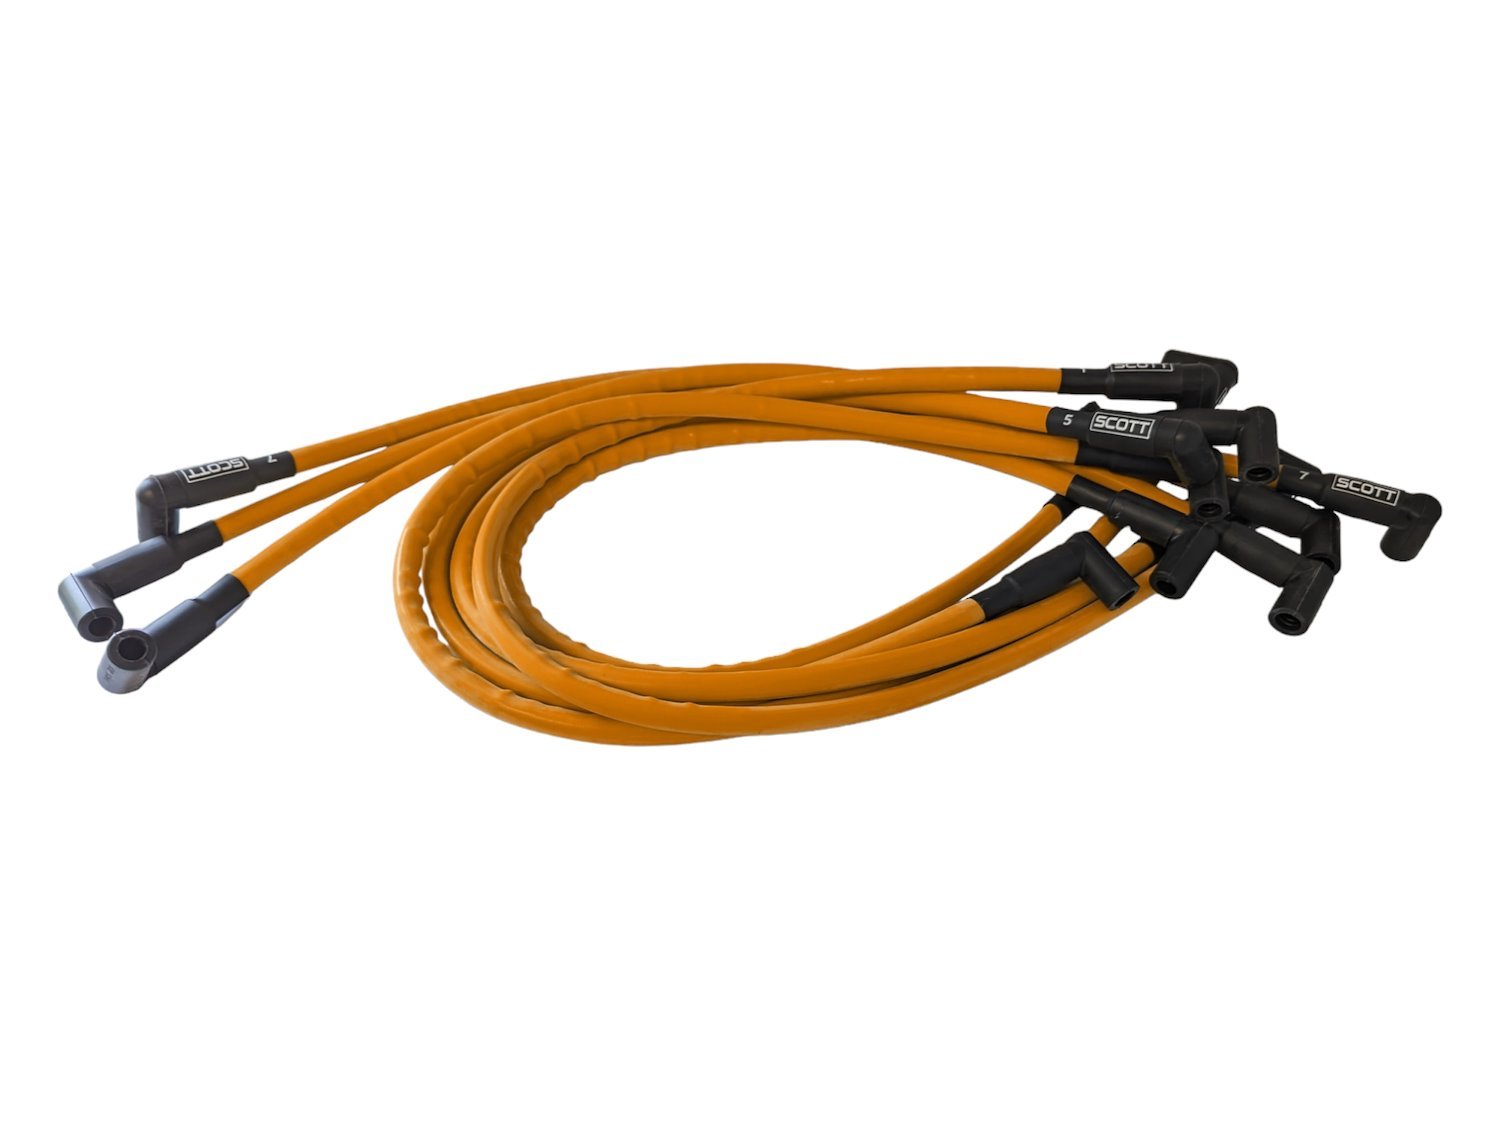 SPW-CH-516-5 High-Performance Silicone-Sleeved Spark Plug Wire Set for Big Block Chevy Dragster, Under Header [Orange]